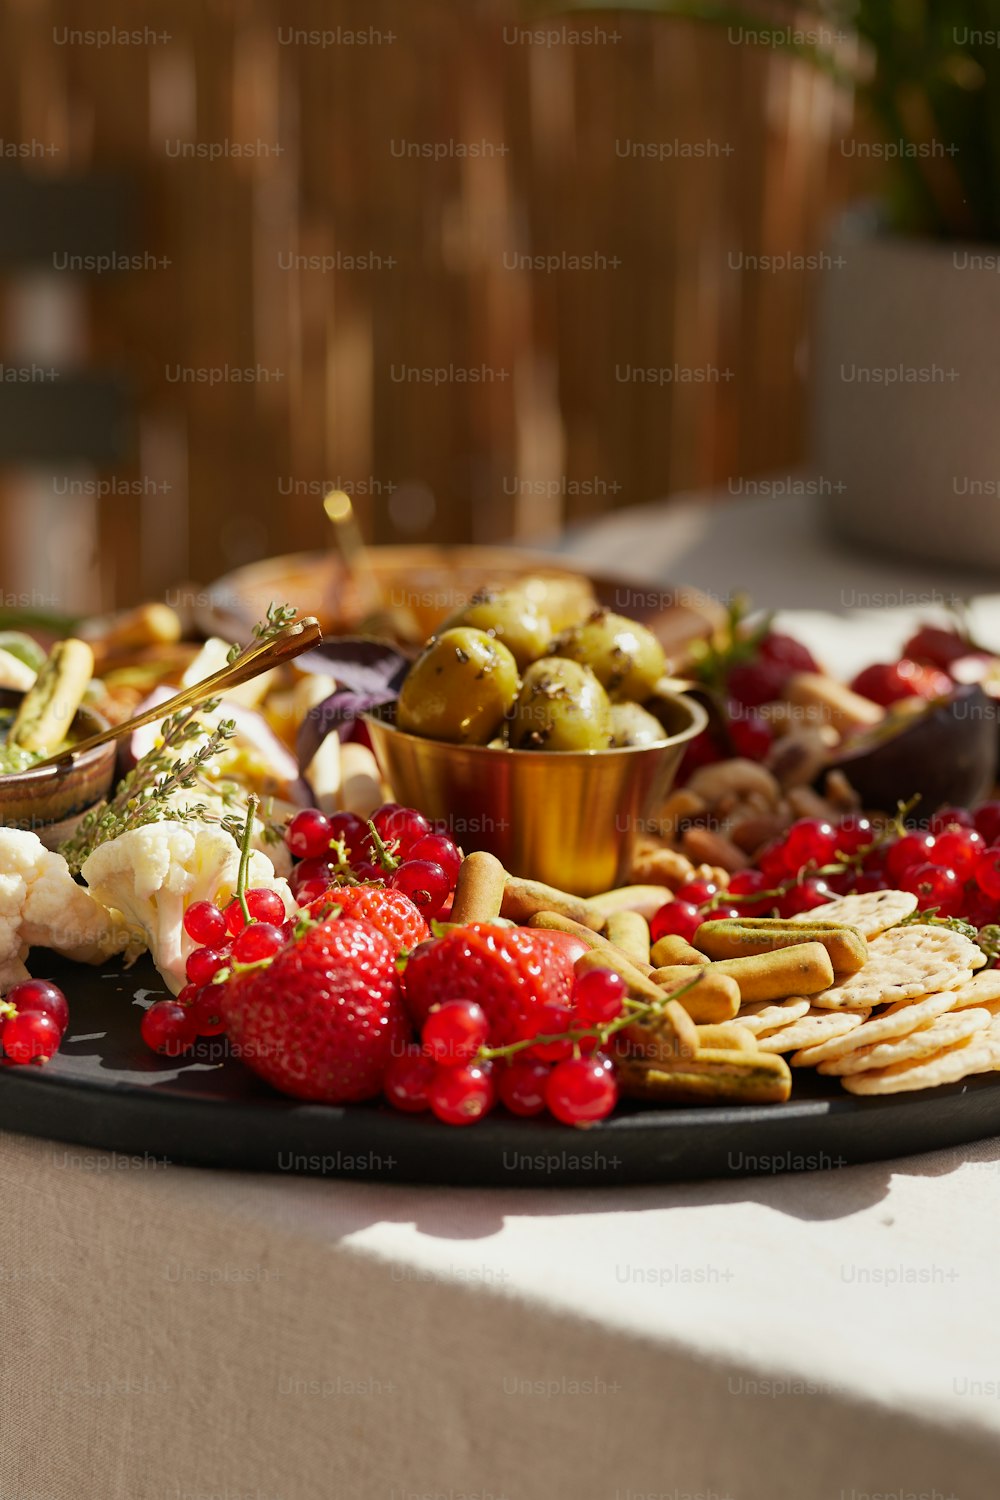 a platter of fruit and crackers on a table